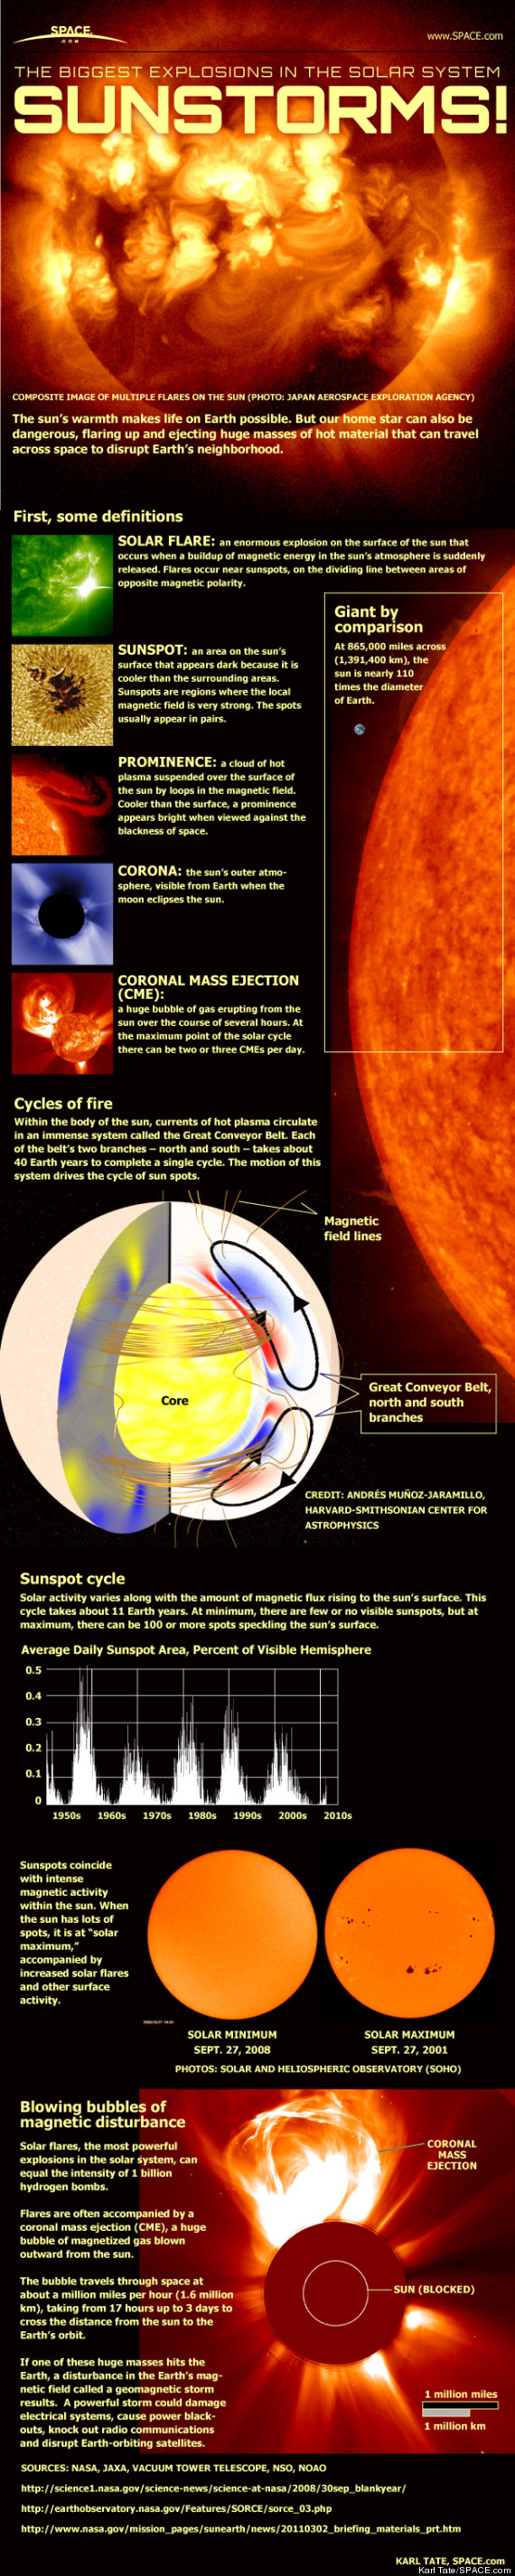 New Solar Flare Study Sheds Light On How Sun Eruptions Form HuffPost